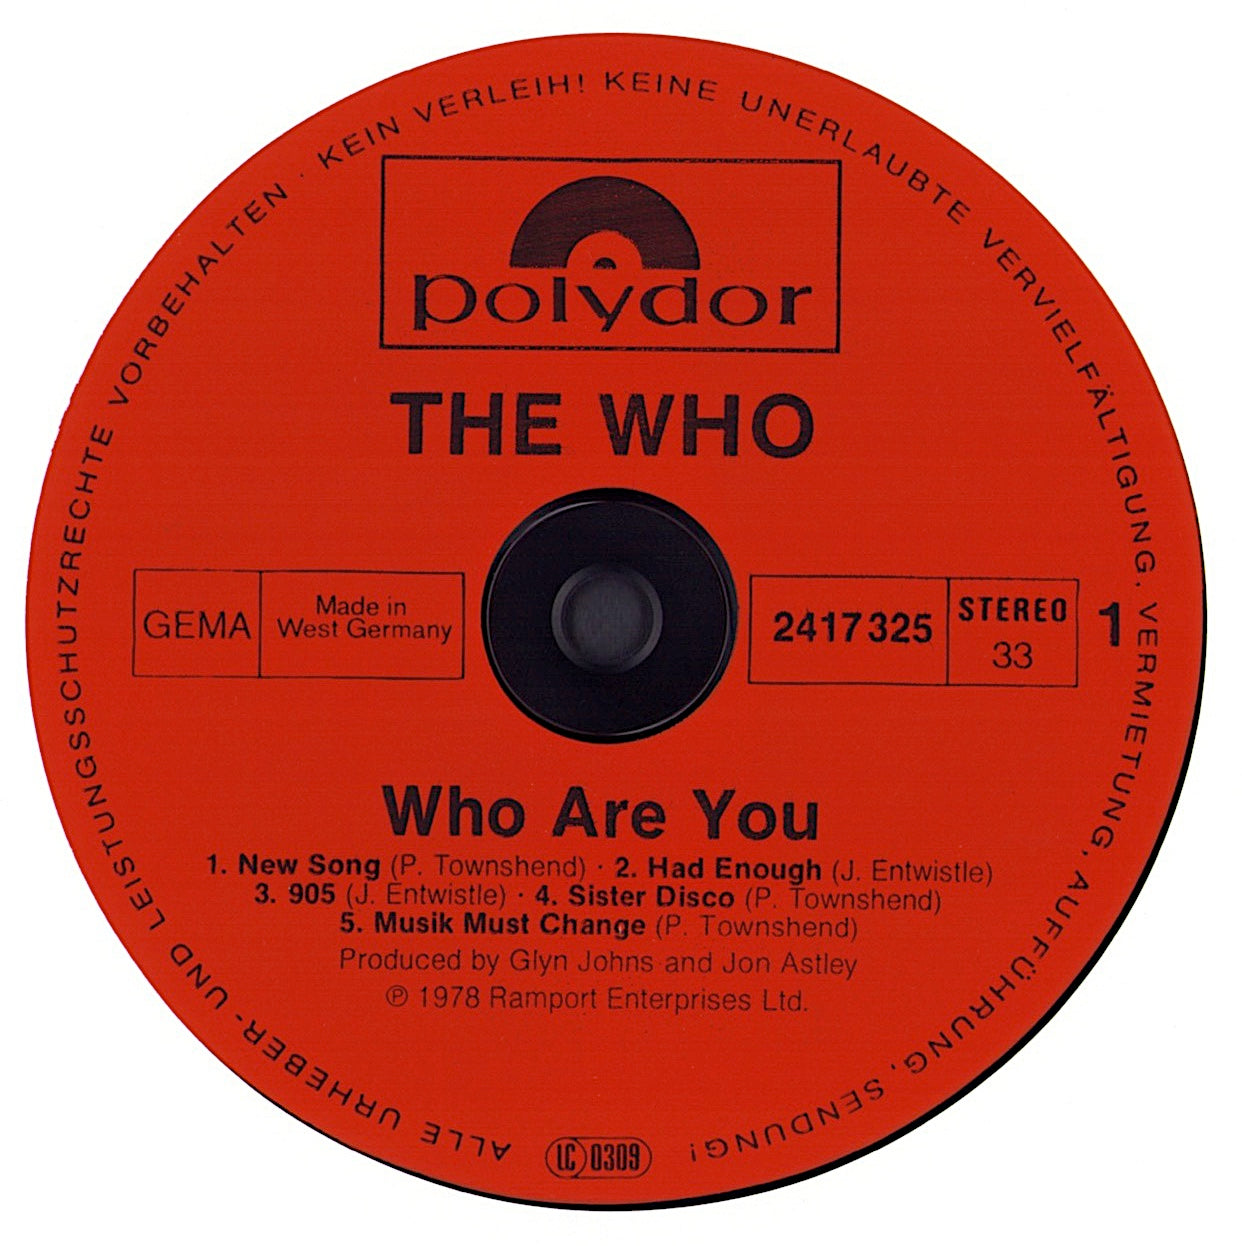 The Who - Who Are You Vinyl LP